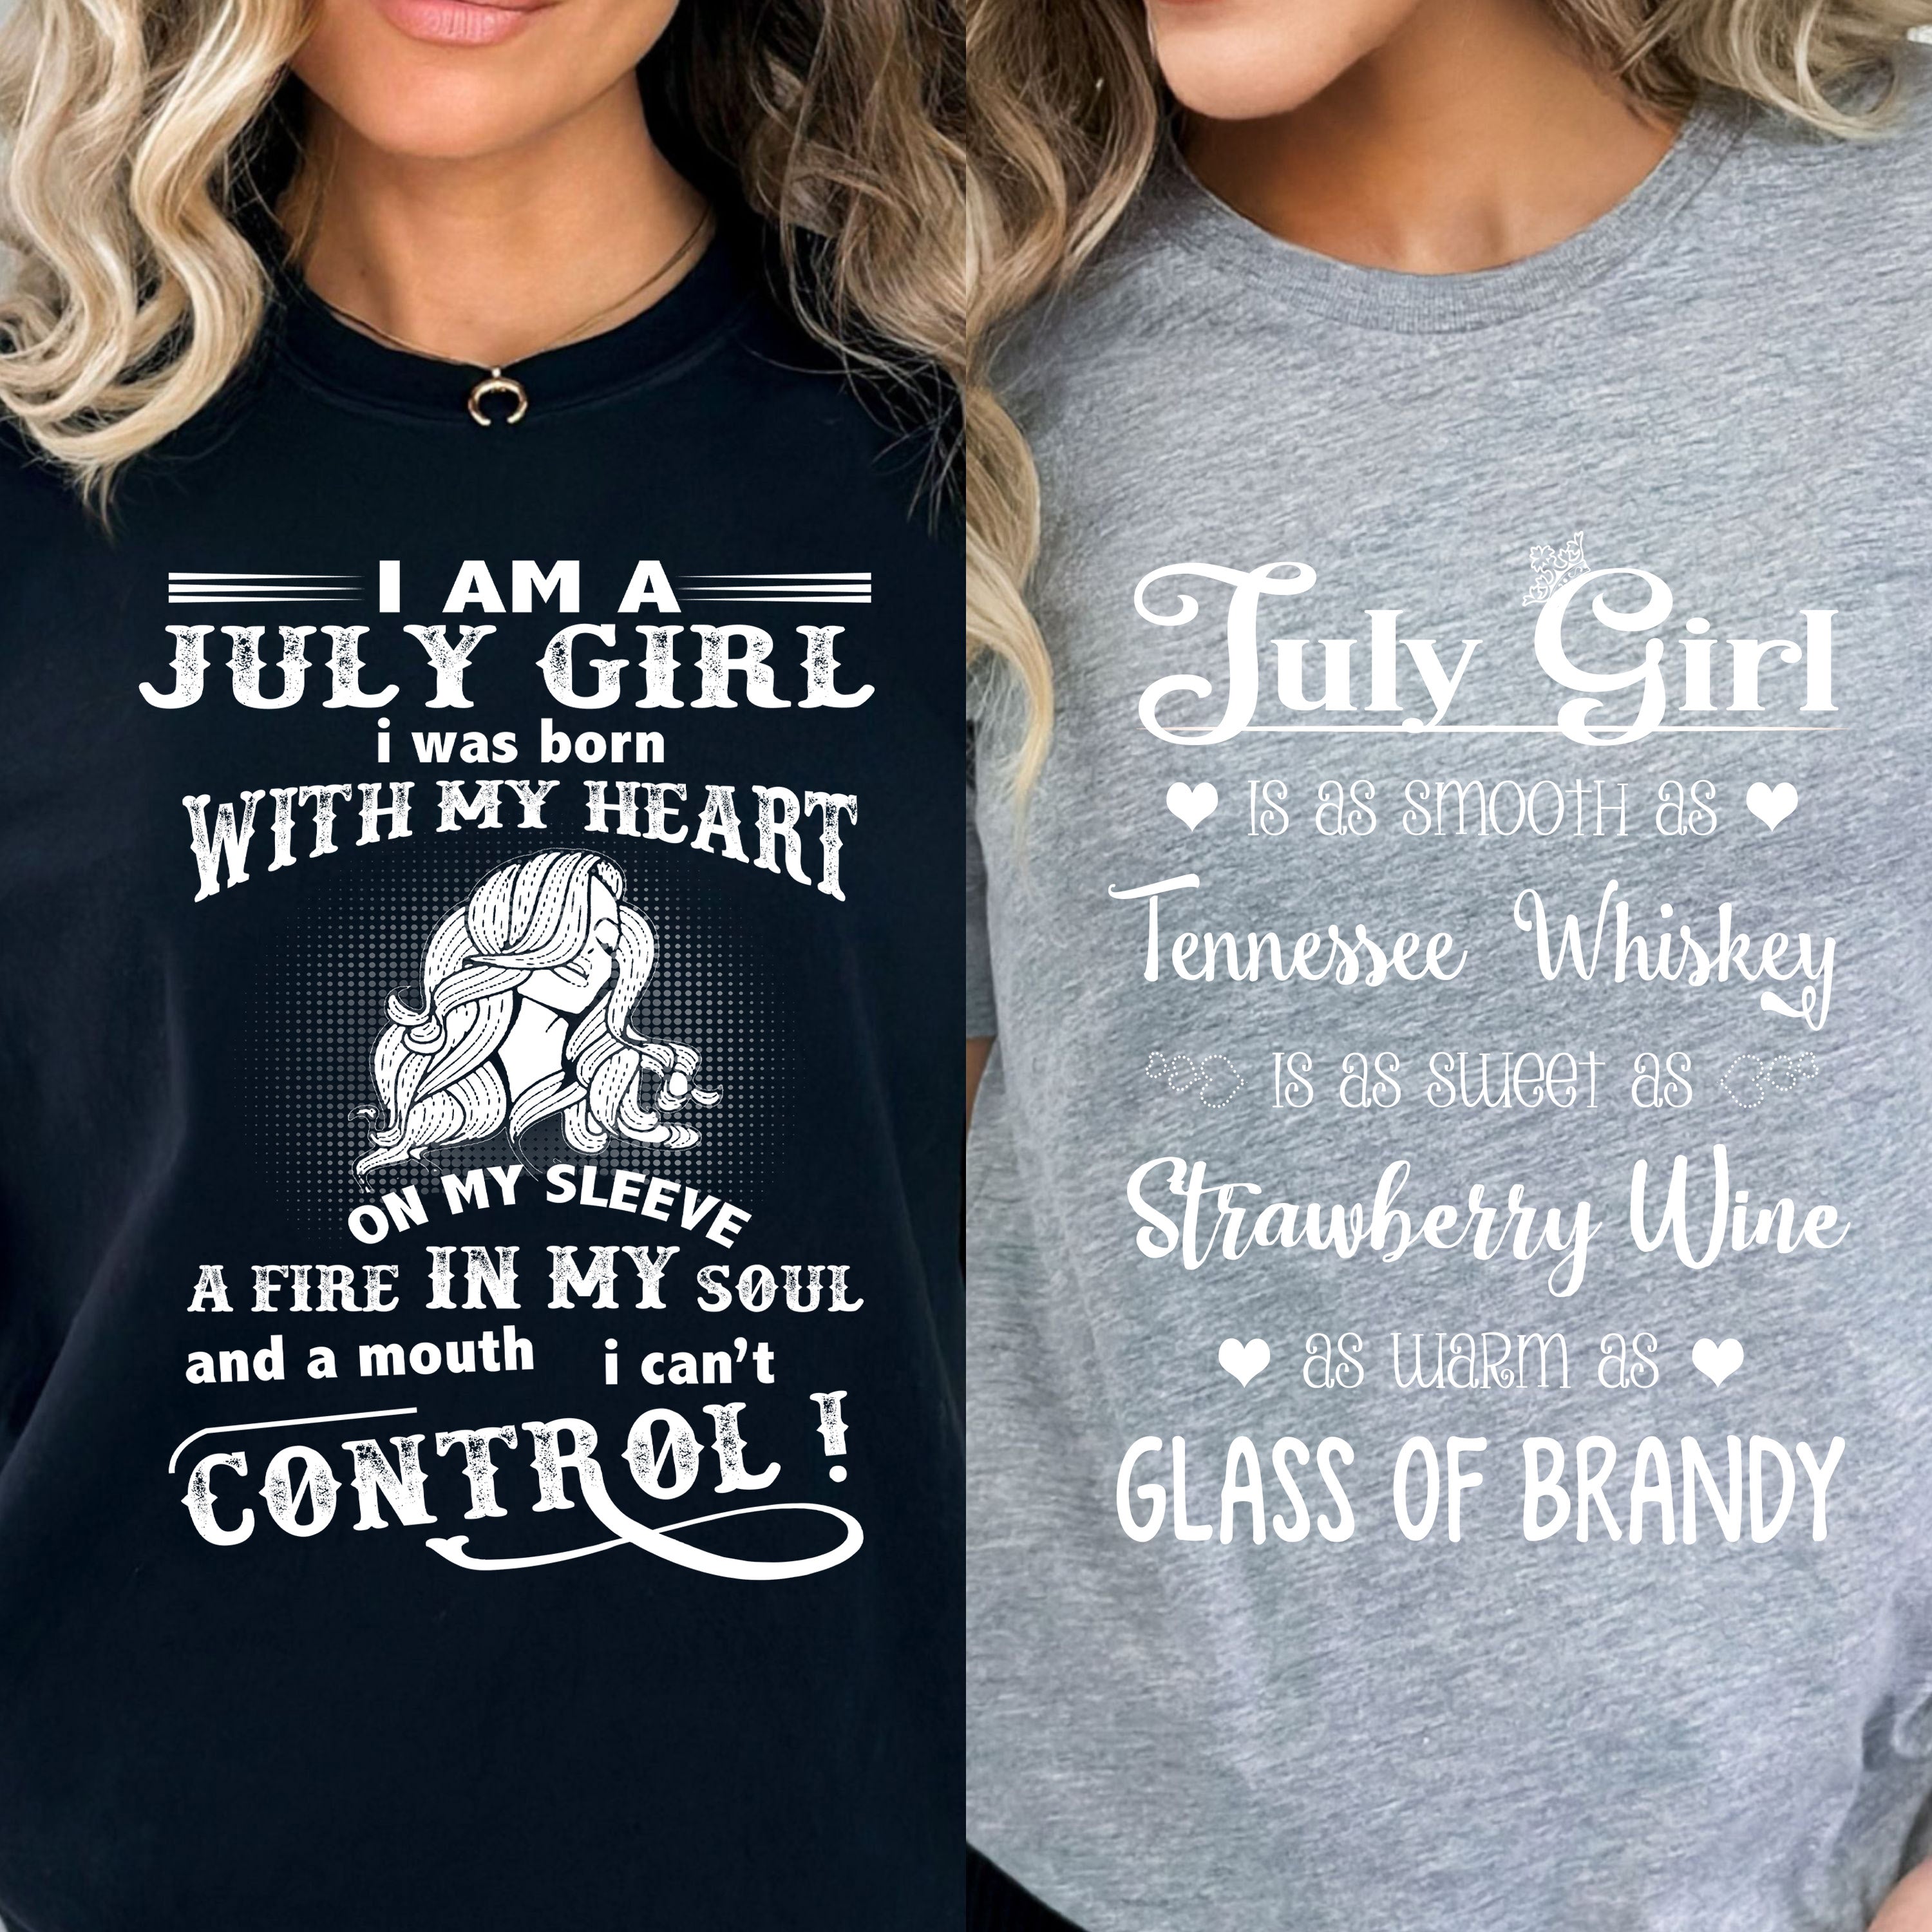 "July Whiskey + Control -Pack of 2".